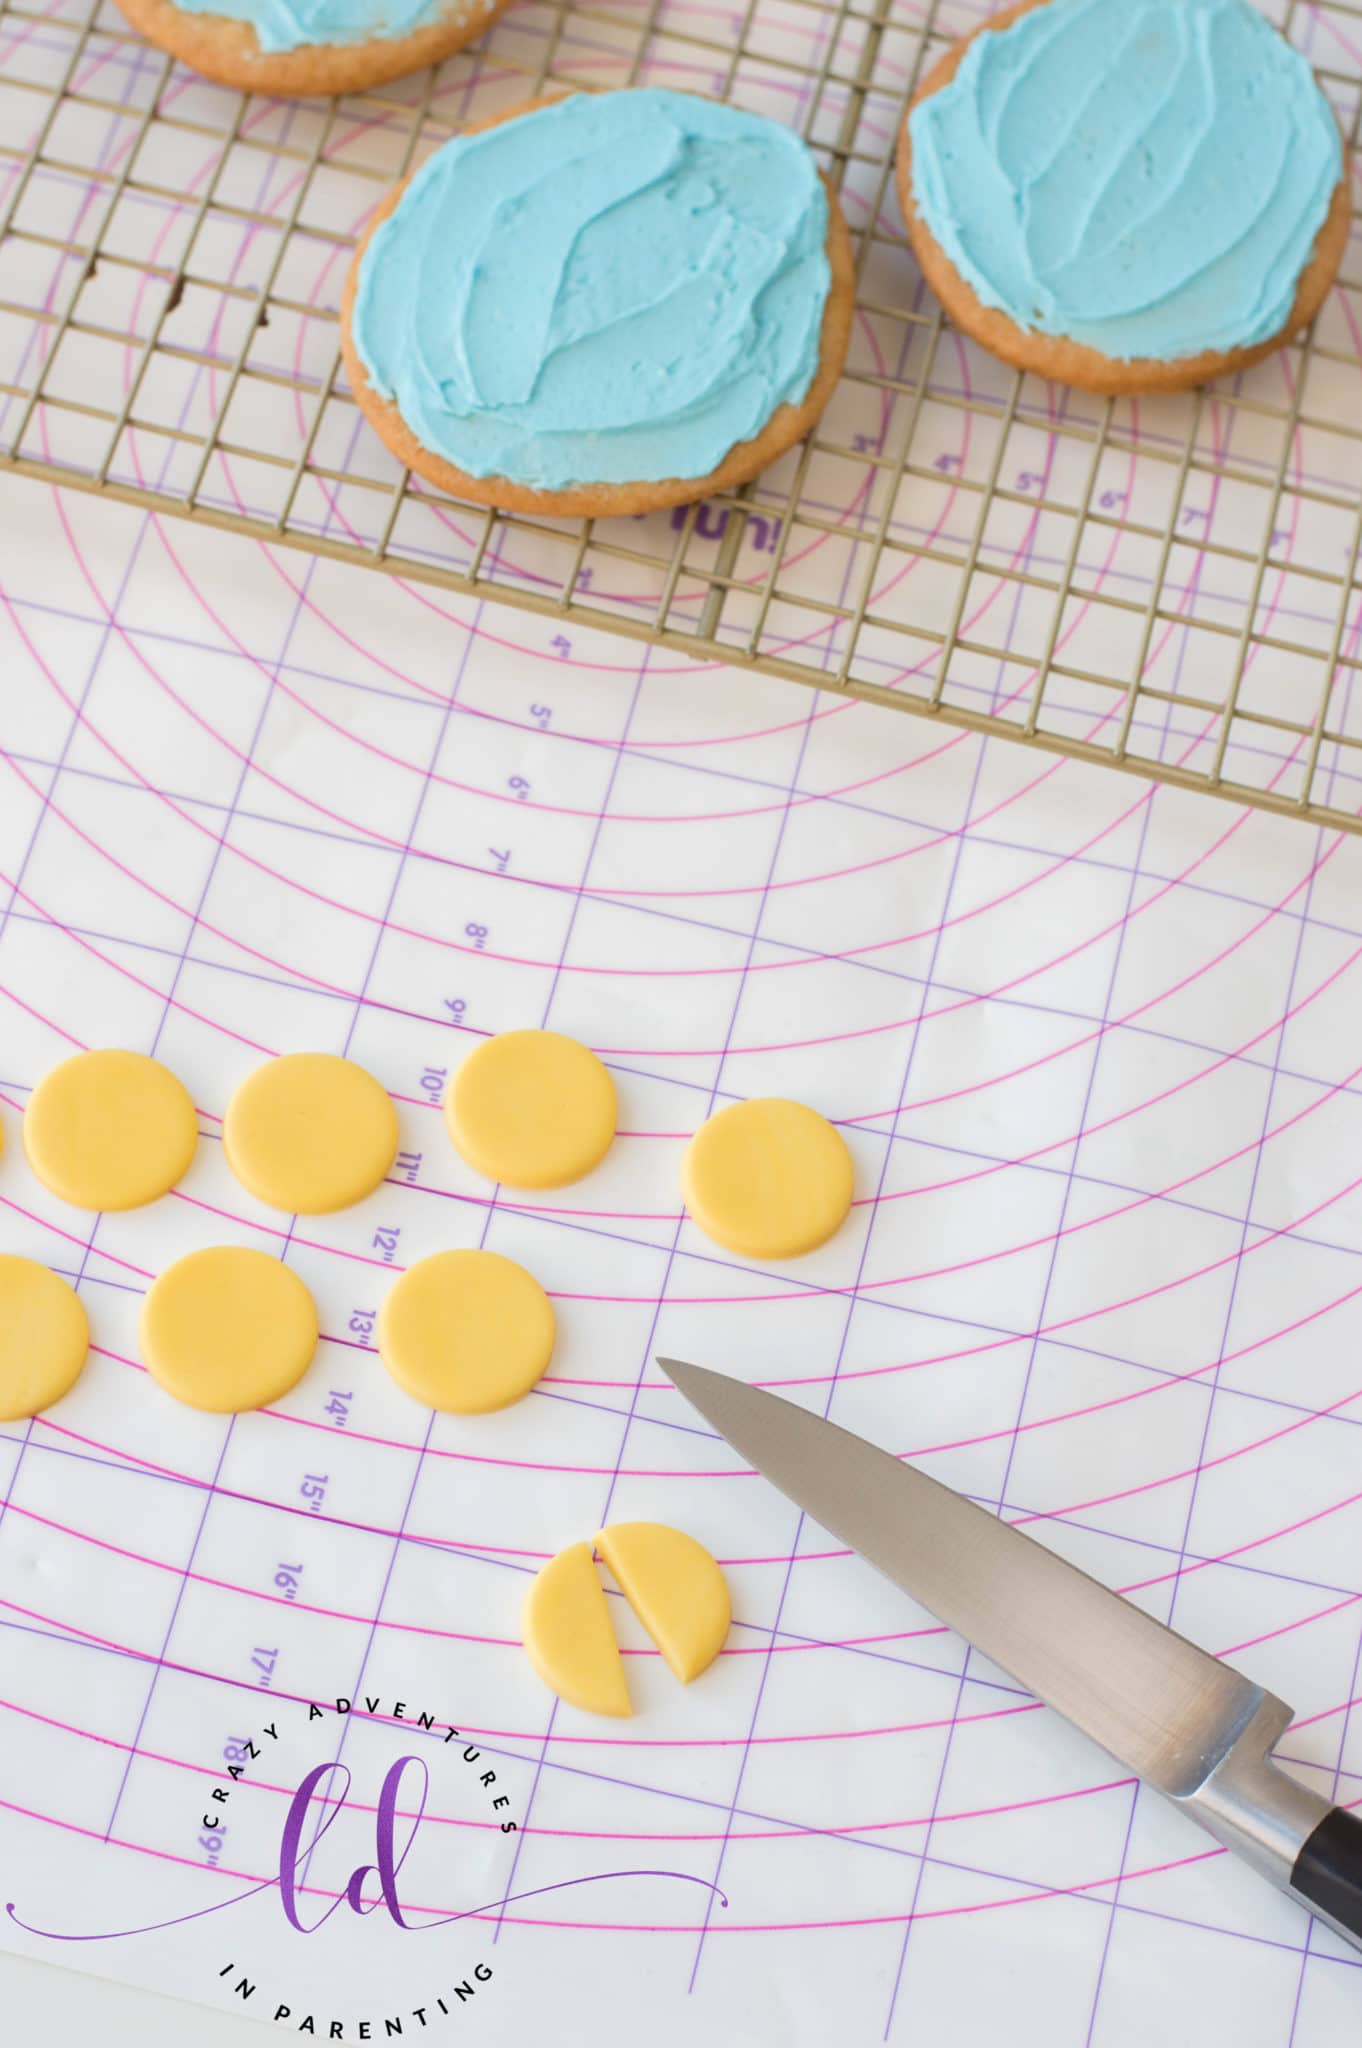 Trim Yellow Fondant for Chick Egg Cookies